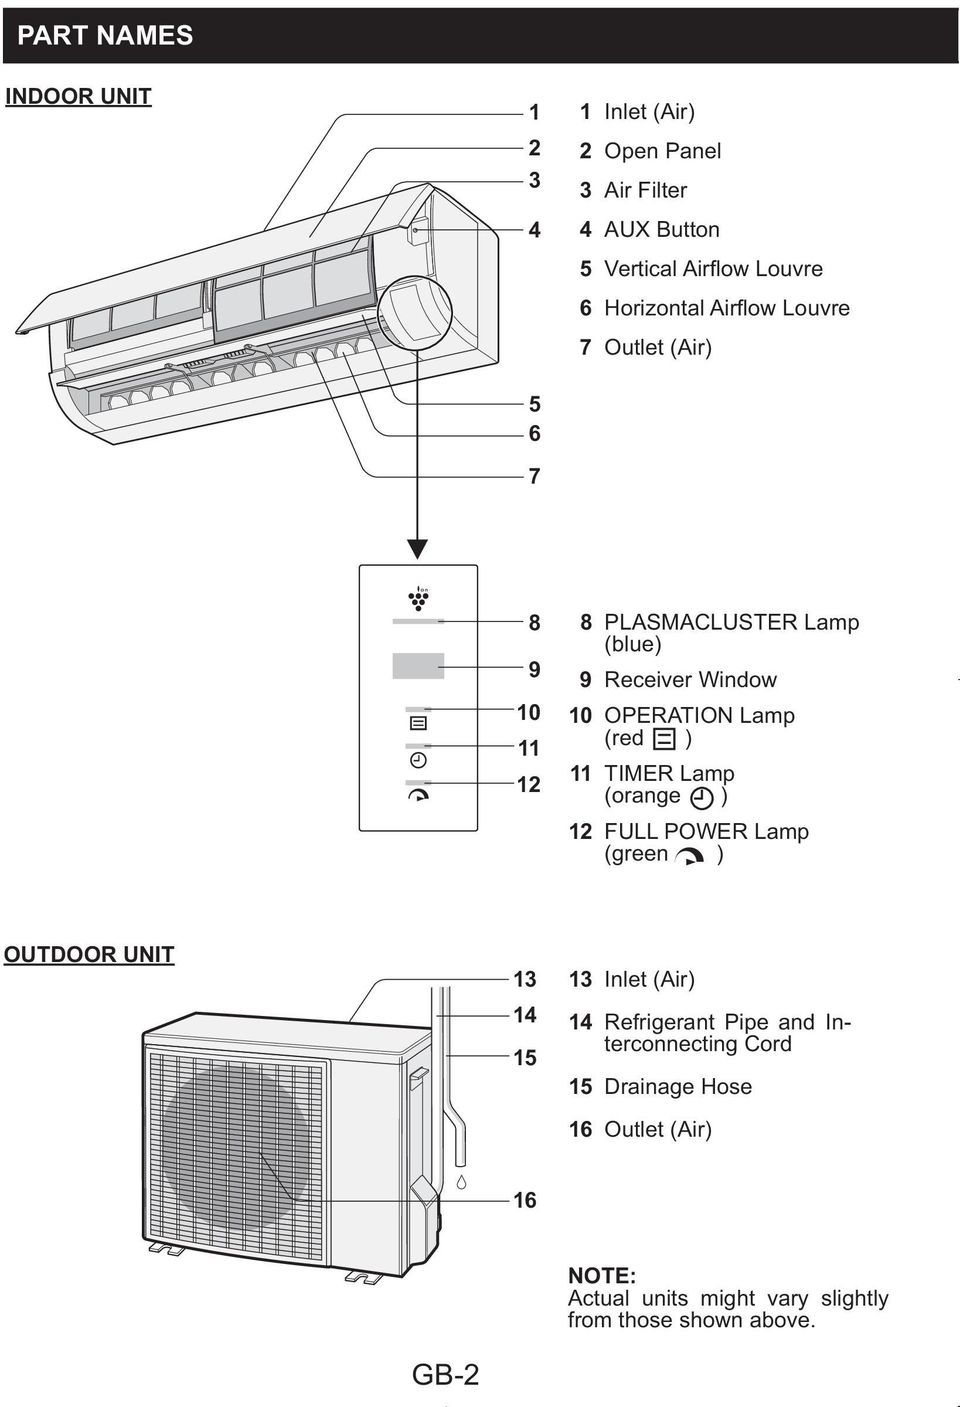 FULL POWER Lamp (green ) OUTDOOR UNIT 4 5 Inlet (Air) 4 Refrigerant Pipe and Interconnecting Cord